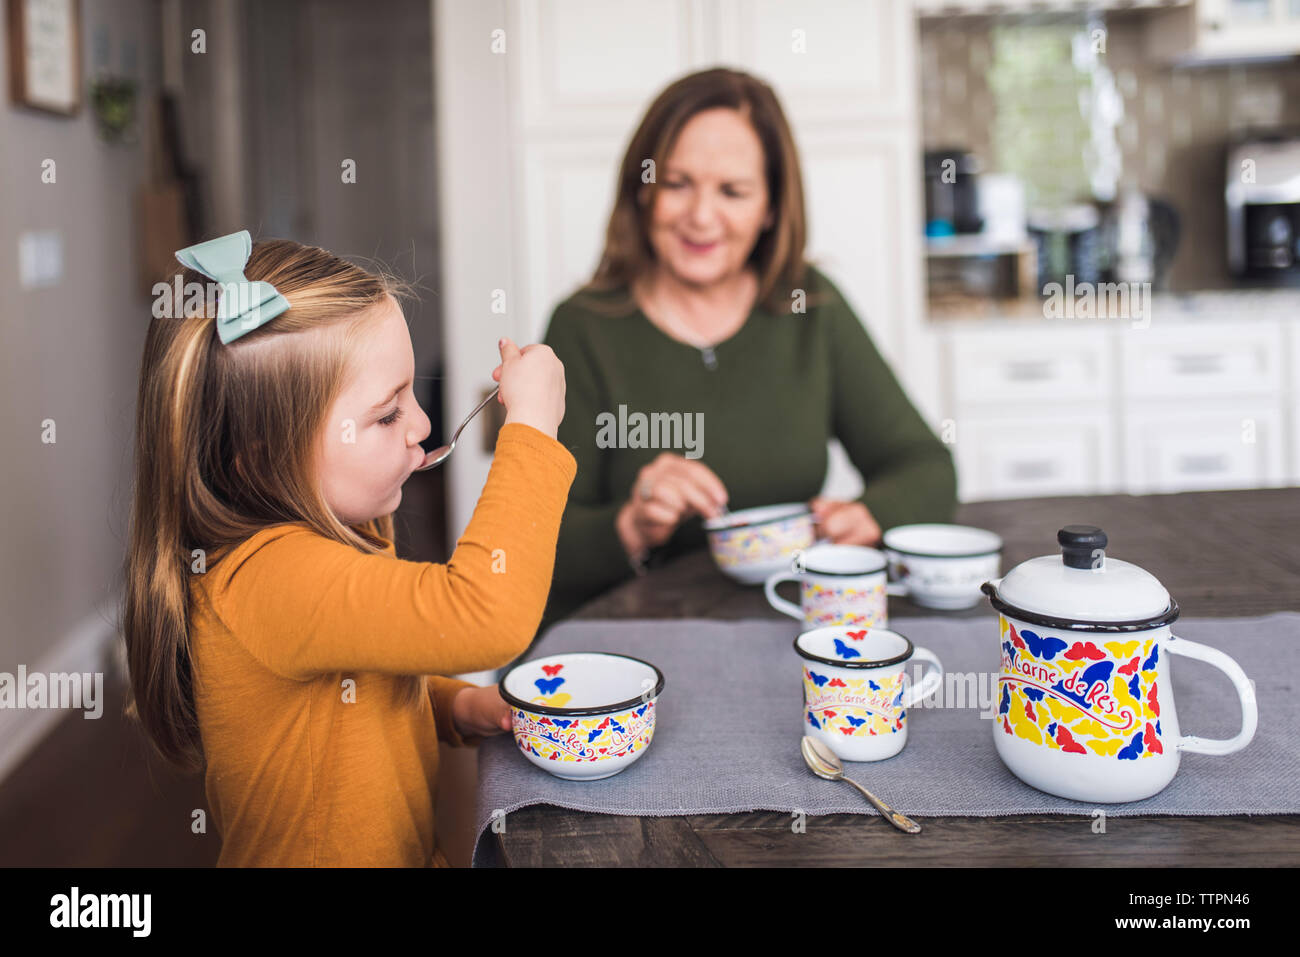 Granddaughter and grandmother in kitchen playing with tea set Stock Photo